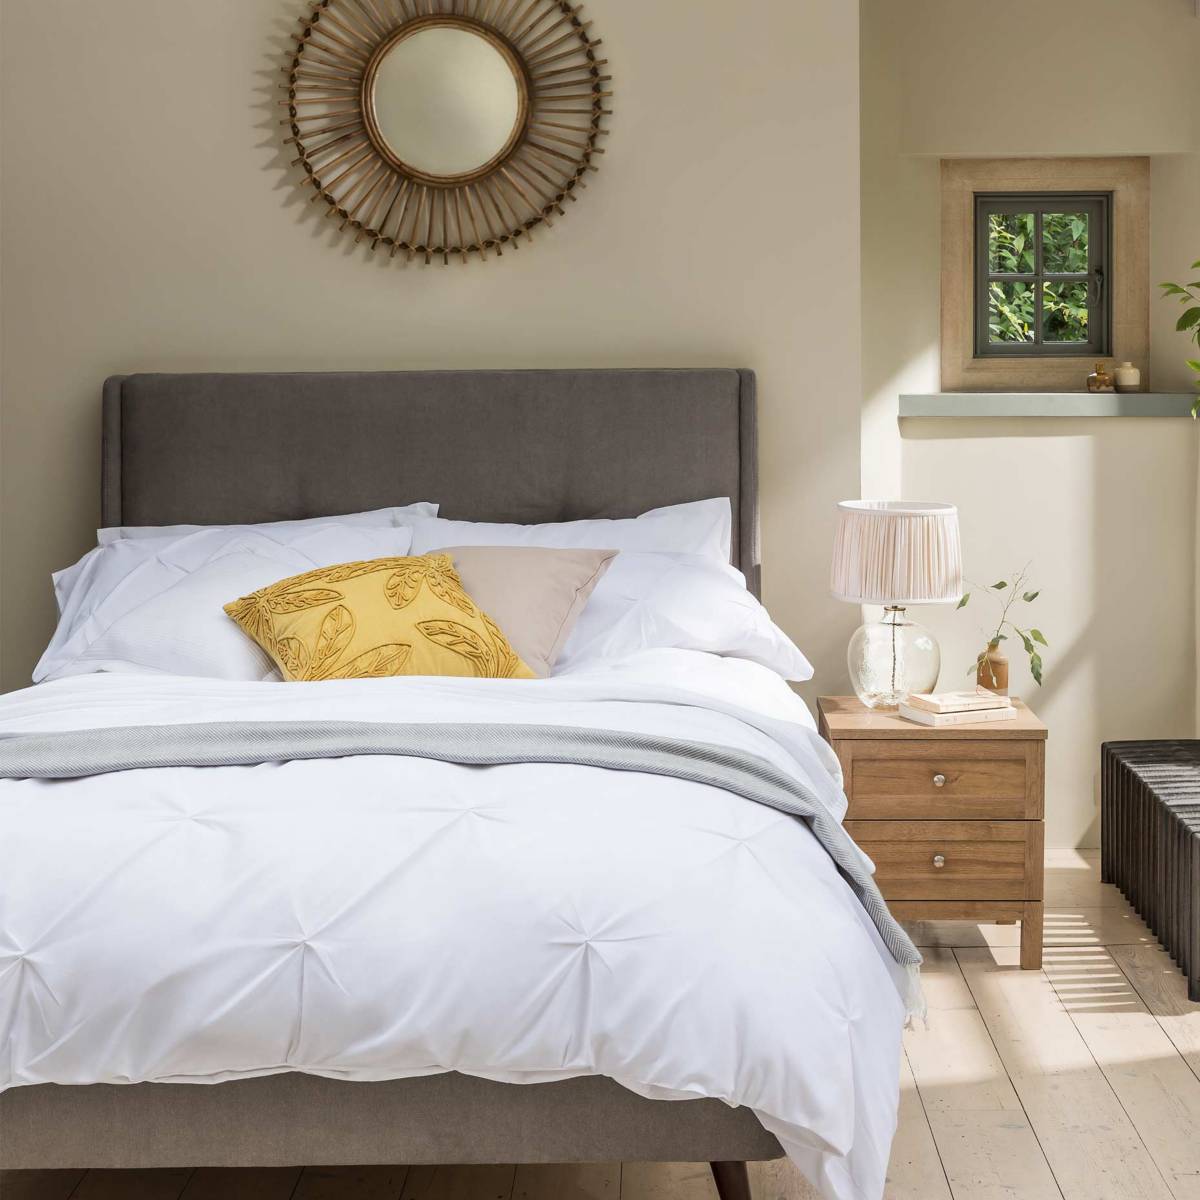 Modern bedroom with double bed made up with plain white bedding. Shop all bedding